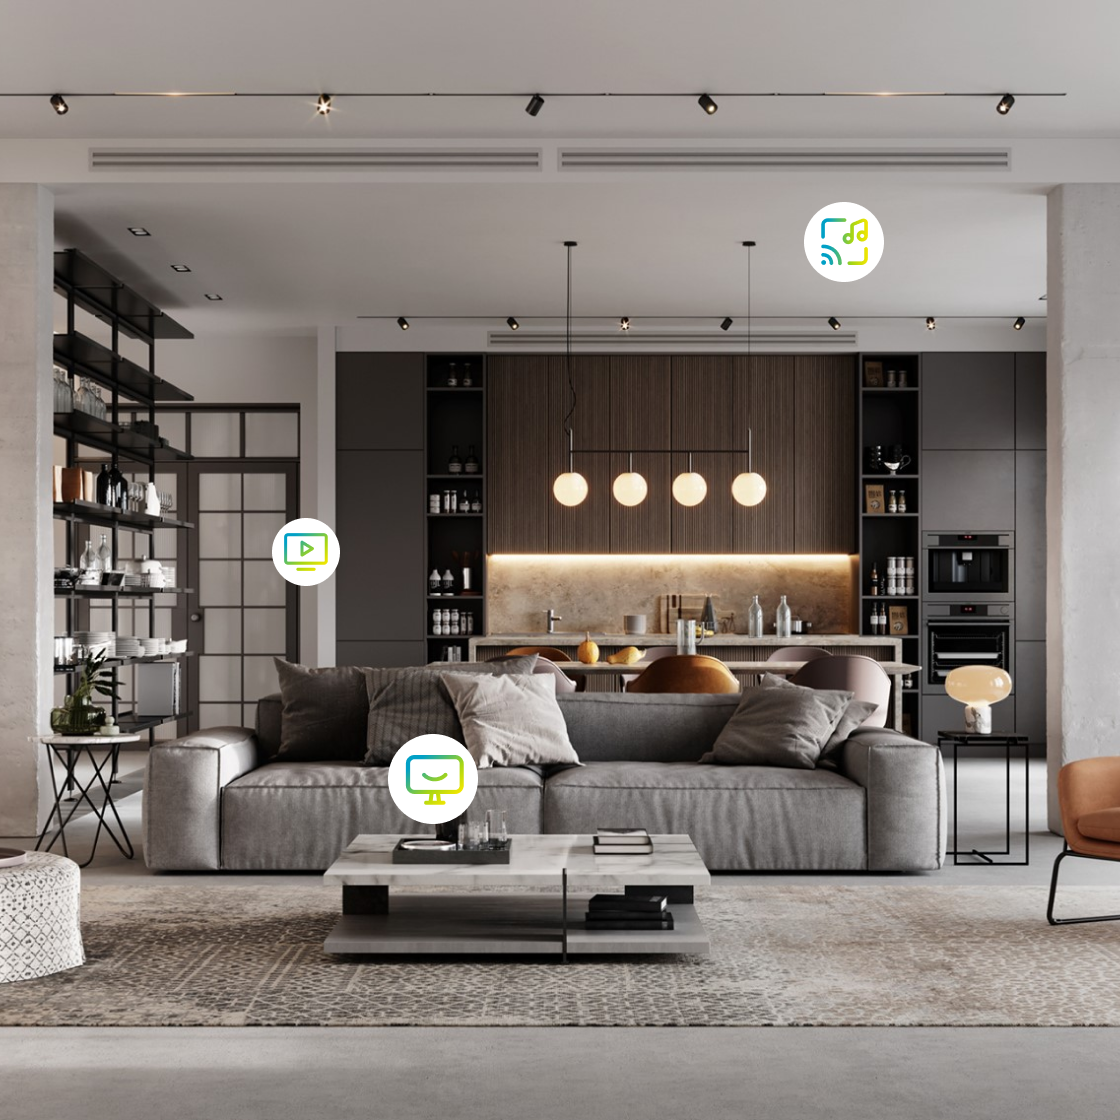 Connect Cayman Smart Home